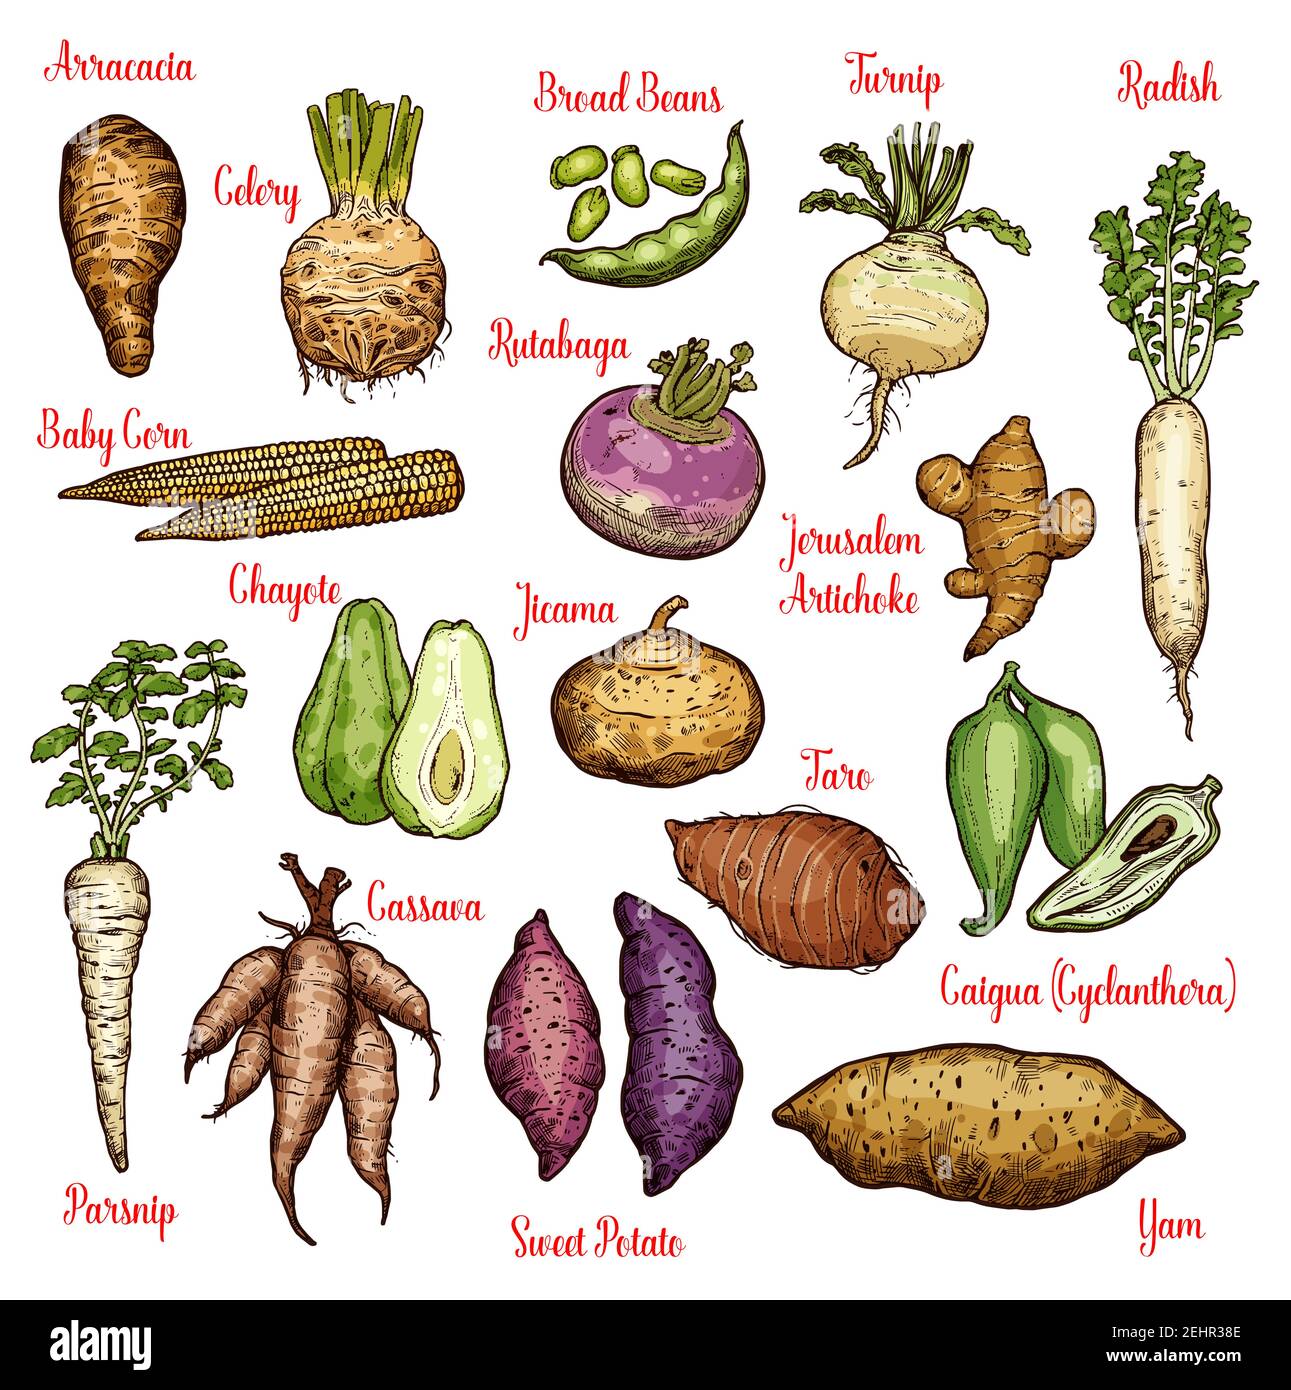 Vegetables sketches with taproots, beans and tubers of exotic plants. Radish, yam and celery, sweet potato, turnip and parsnip, baby corn, broad bean Stock Vector